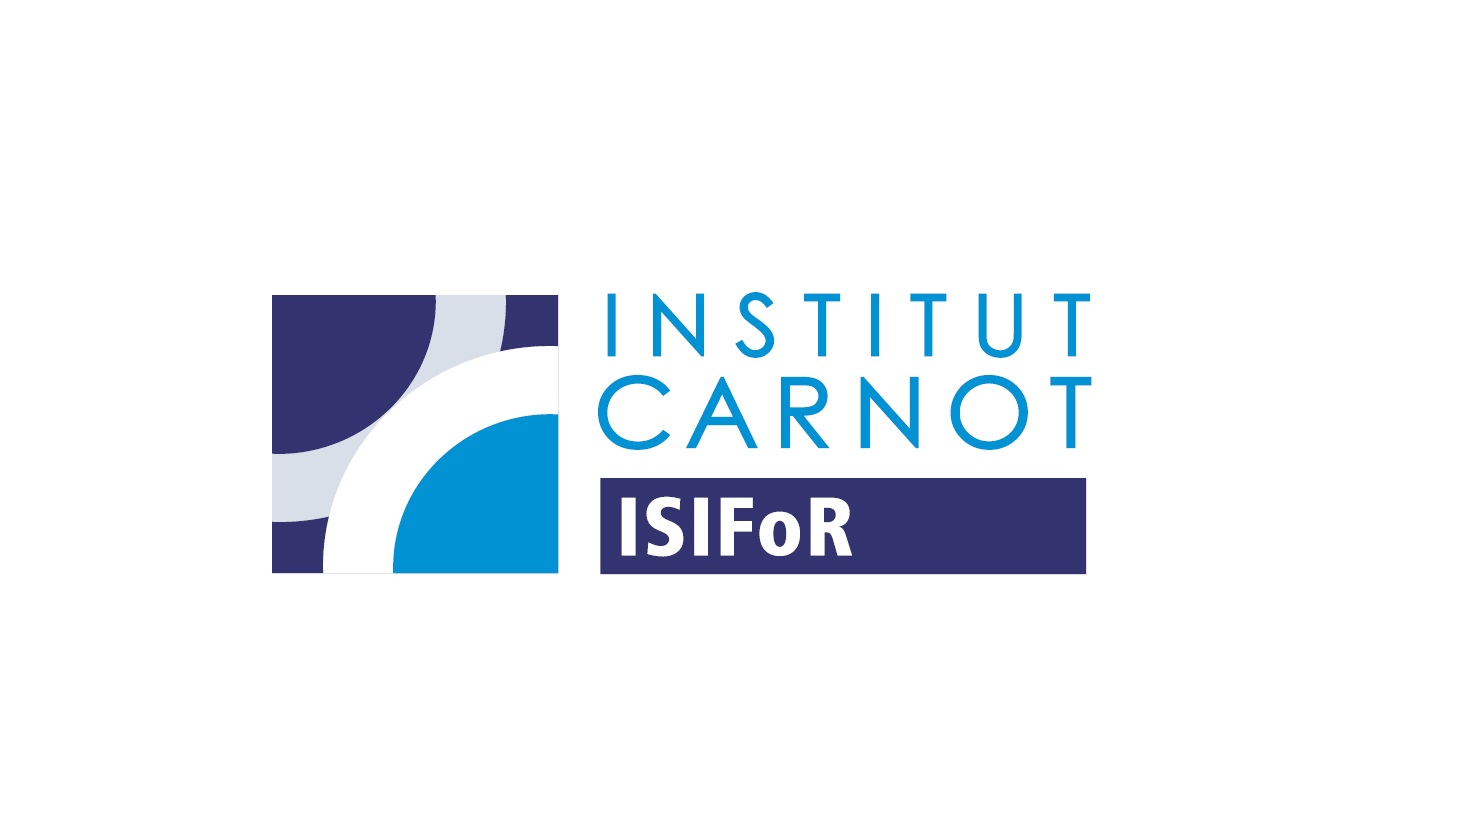 ISIFOR